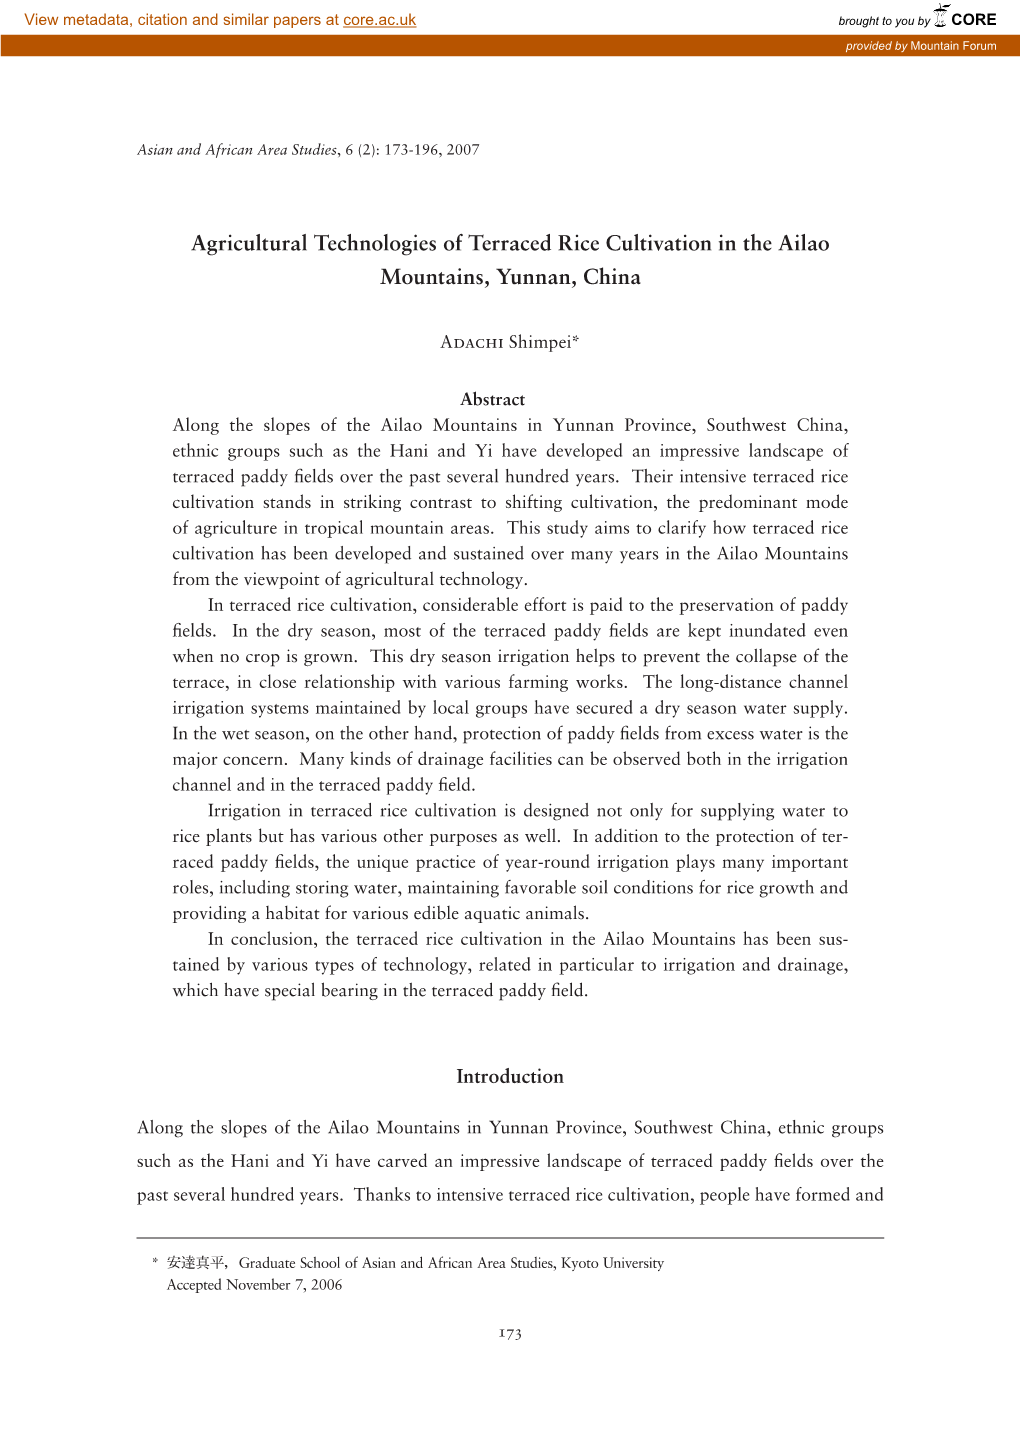 Agricultural Technologies of Terraced Rice Cultivation in the Ailao Mountains, Yunnan, China